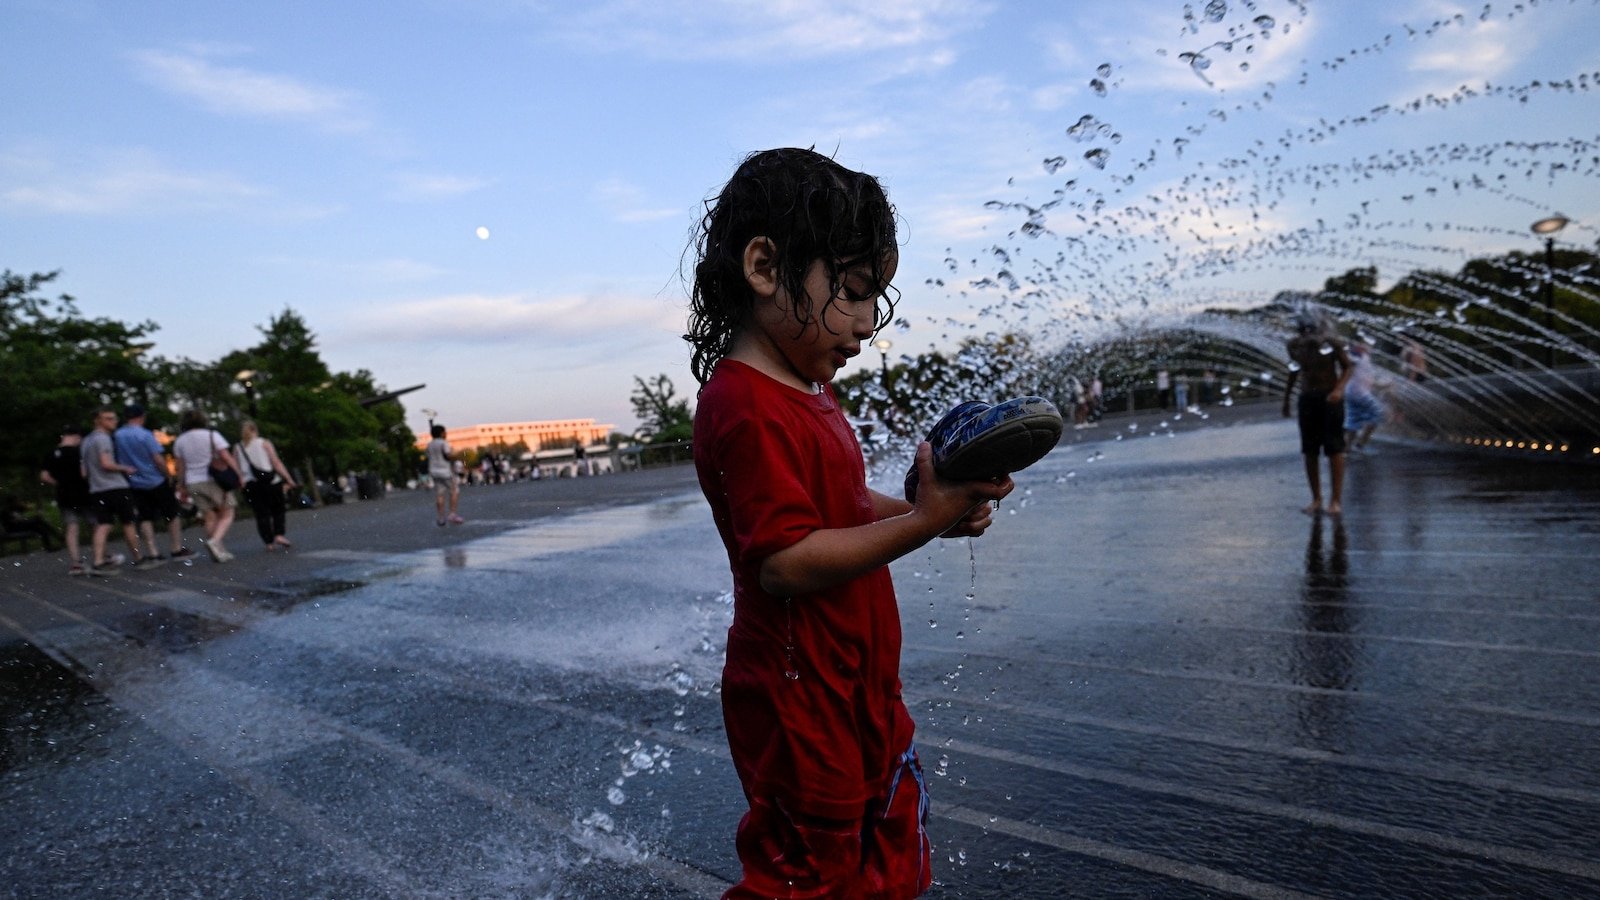 Sweltering heat wave continues, with 16 states under heat alerts